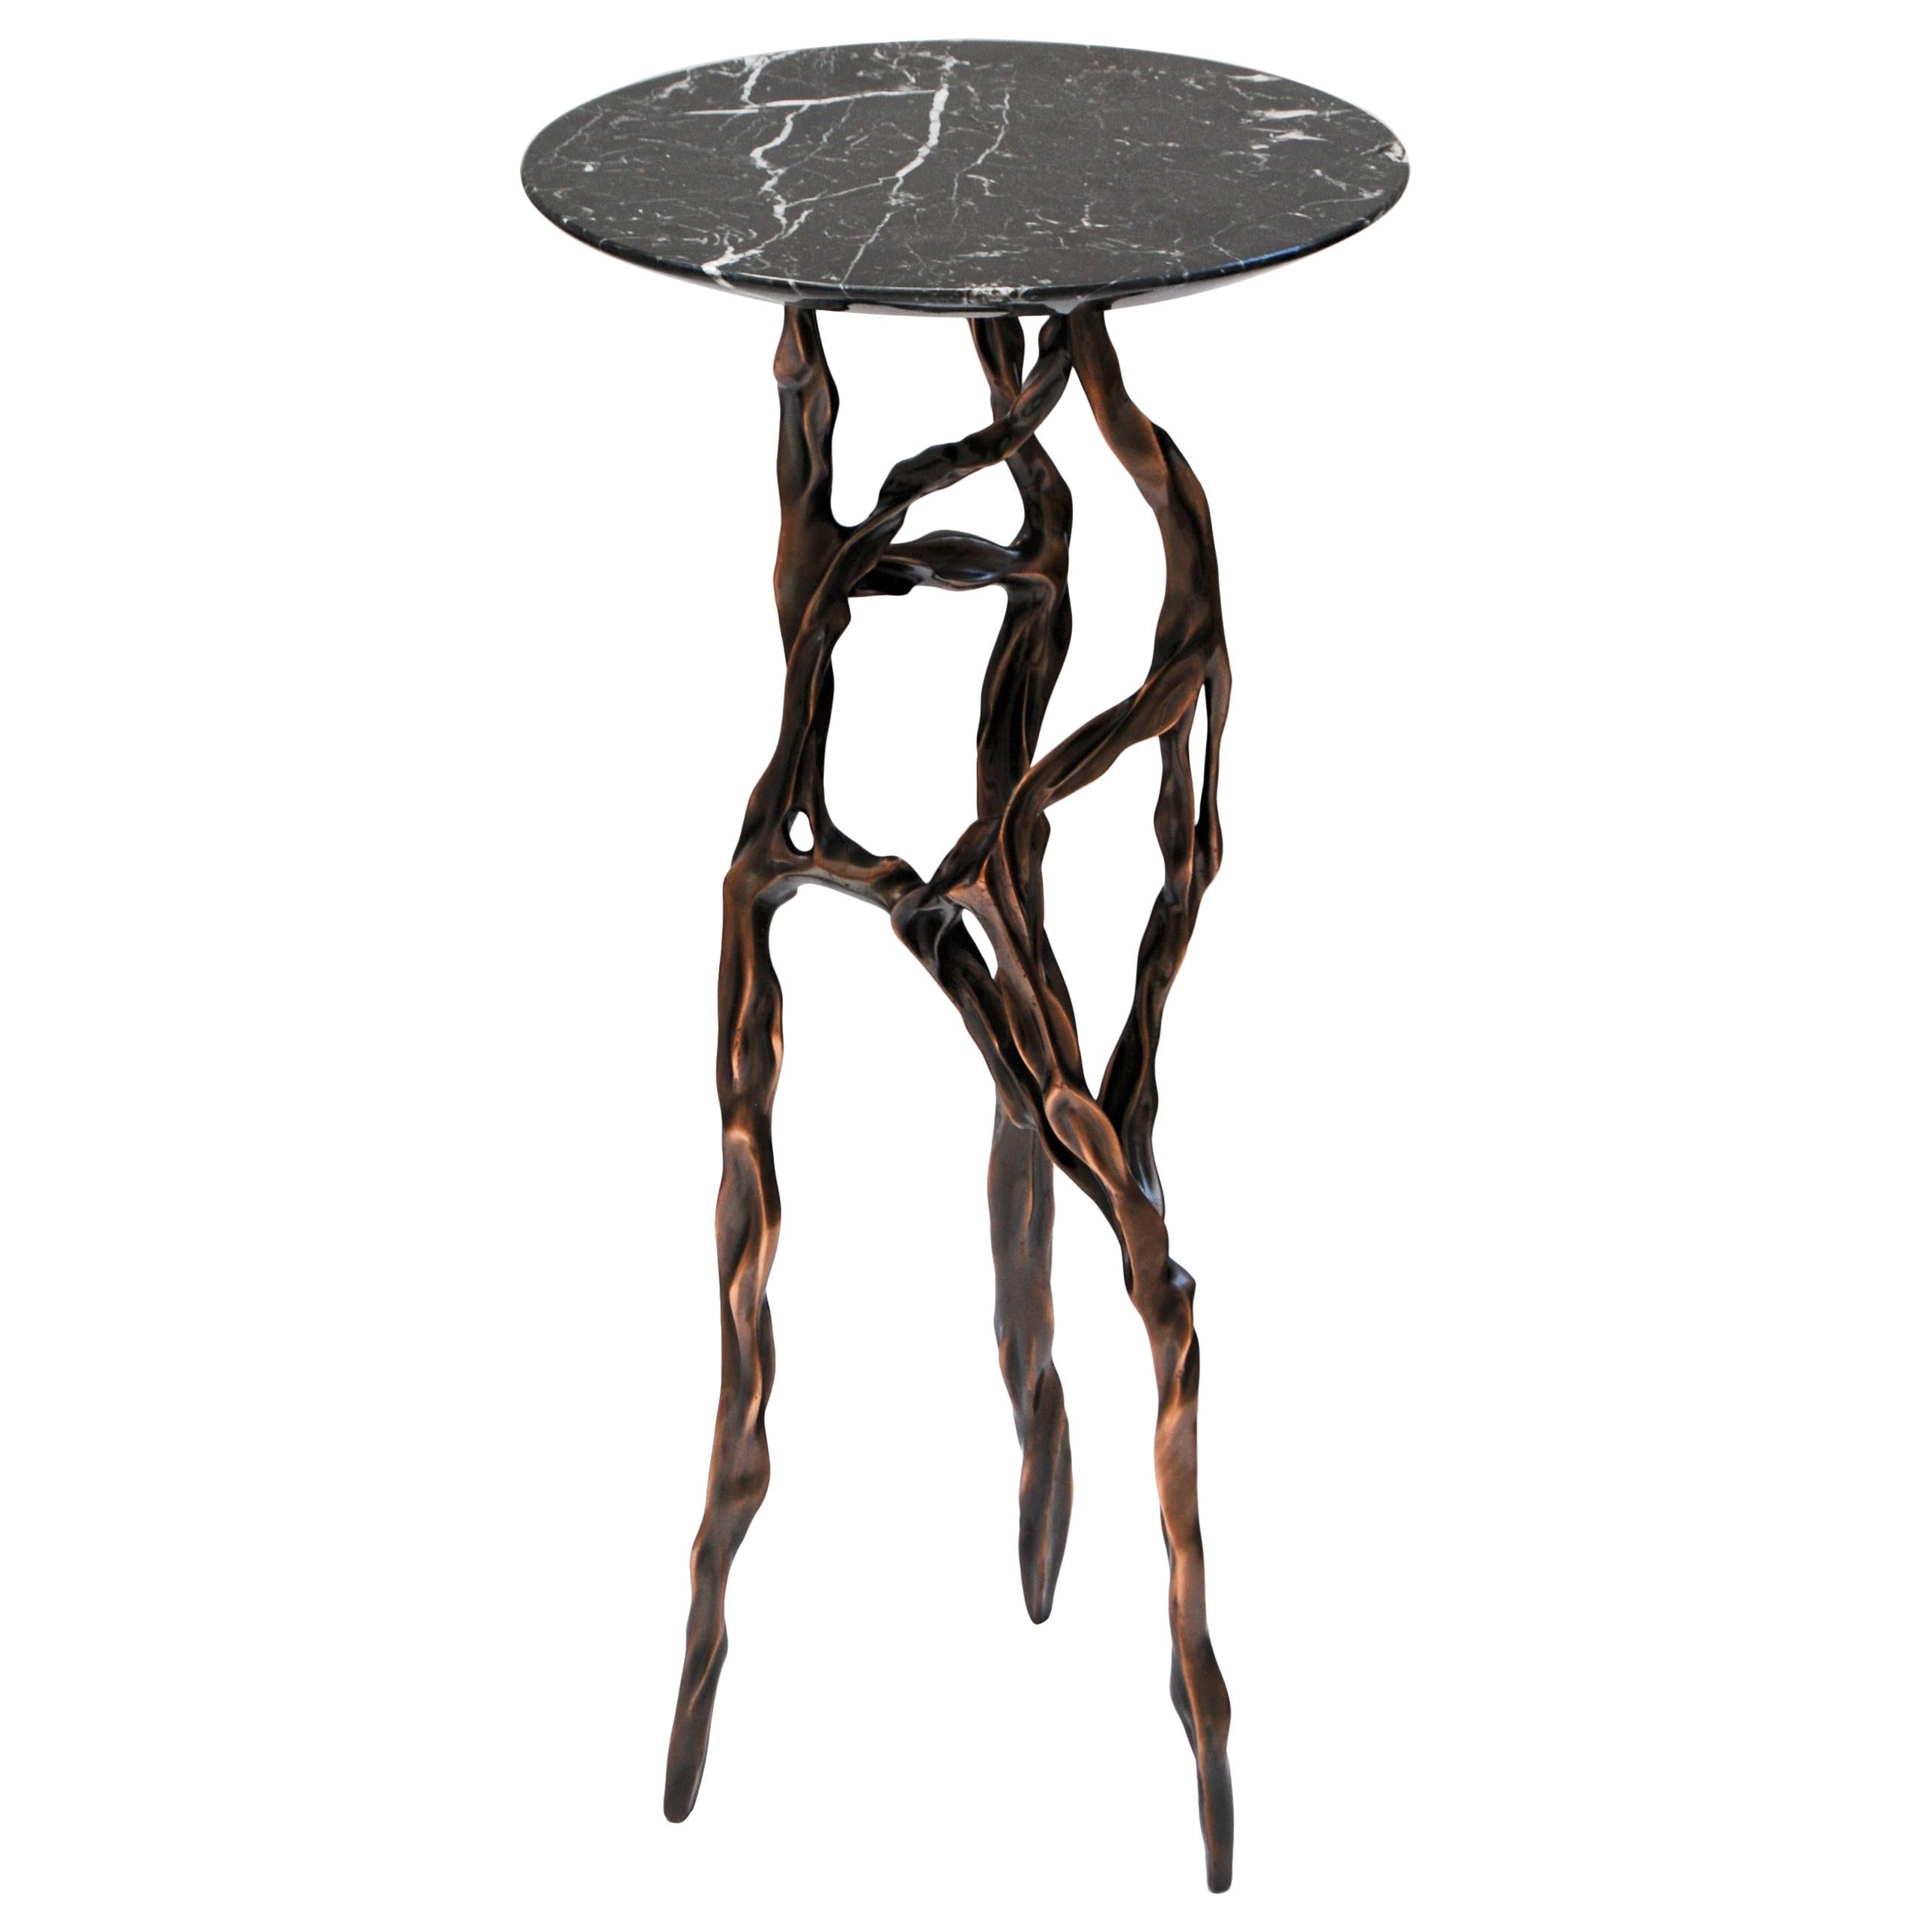 Dark Bronze Side Table with Marquina Marble Top by FAKASAKA Design